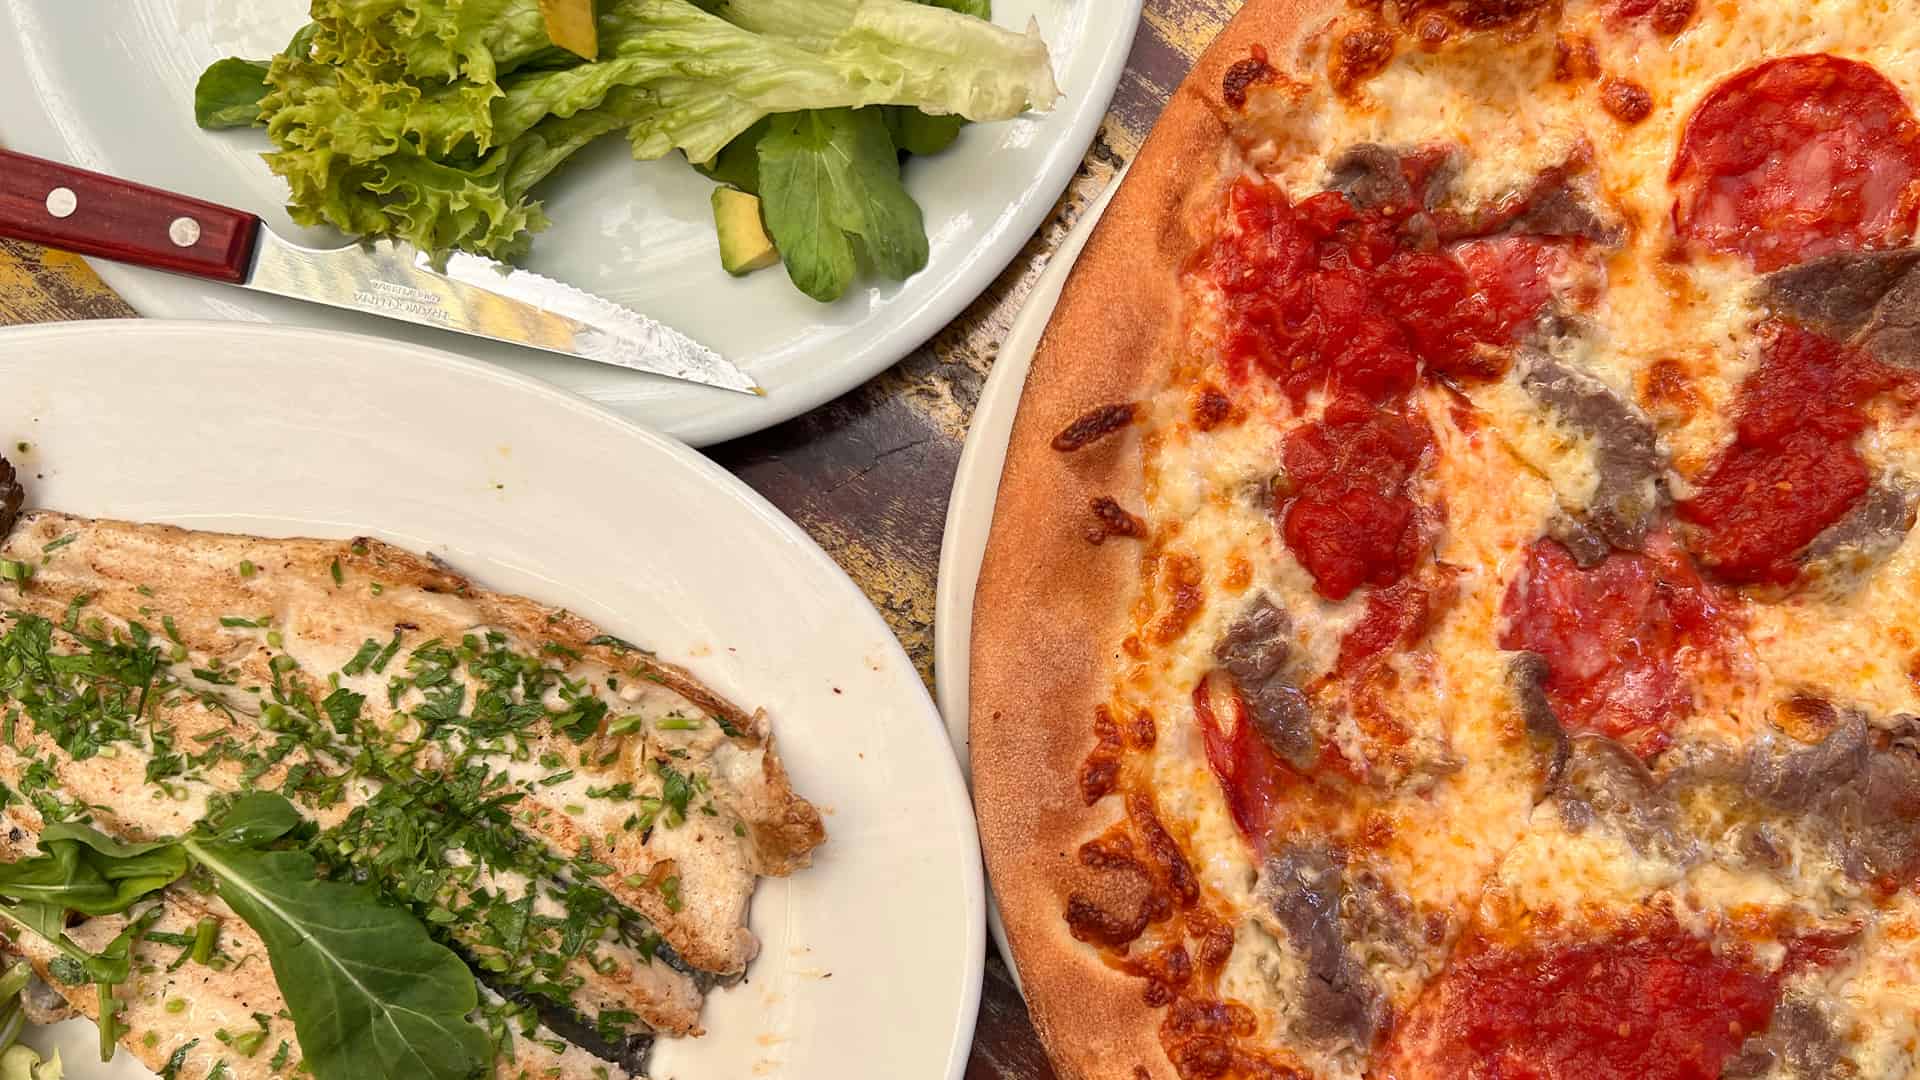 Plates of salad with whole grilled trout and a pizza with meat